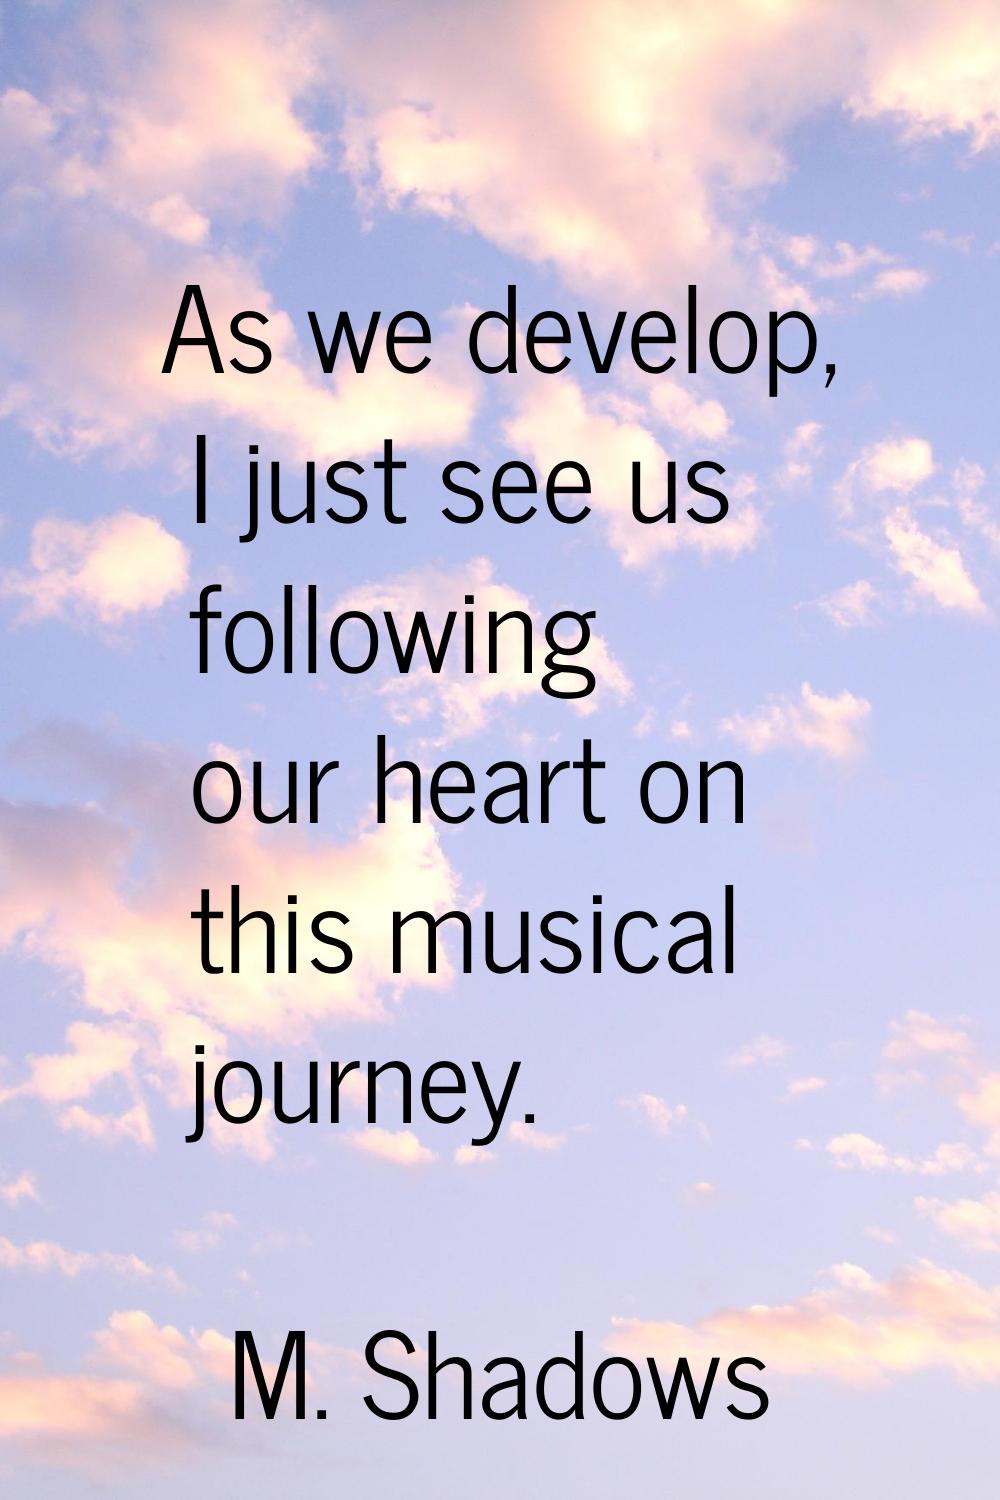 As we develop, I just see us following our heart on this musical journey.